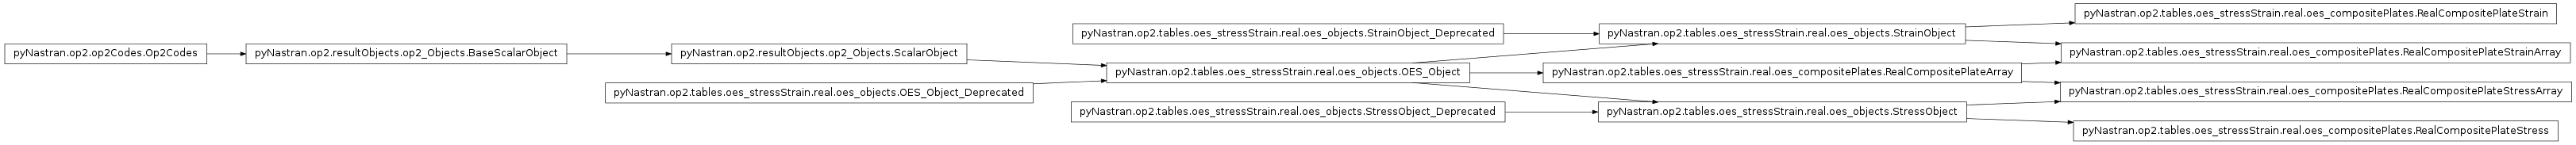 Inheritance diagram of pyNastran.op2.tables.oes_stressStrain.real.oes_compositePlates